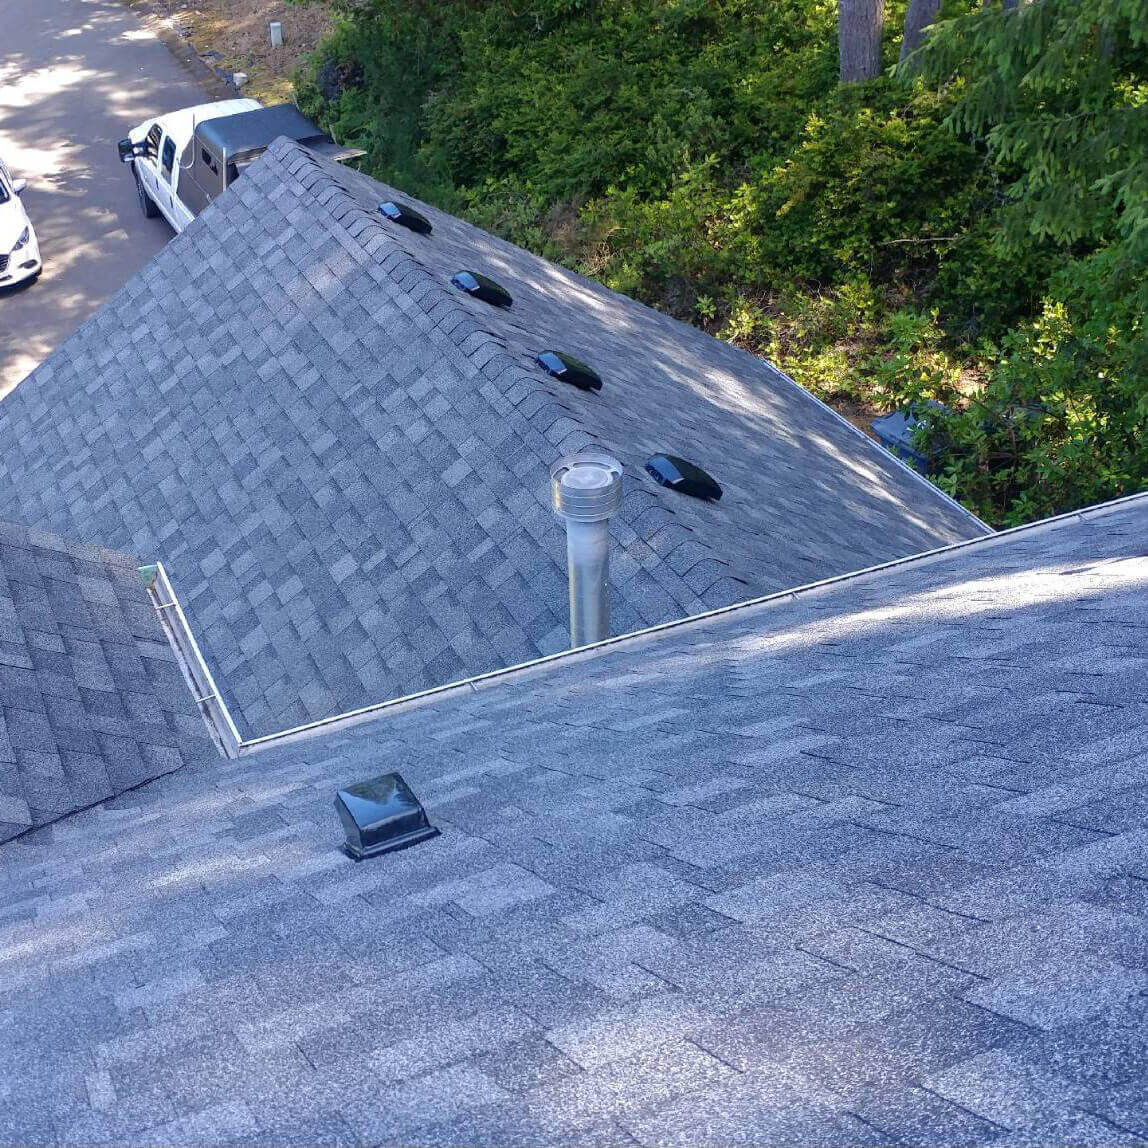 A fully fixed roof.